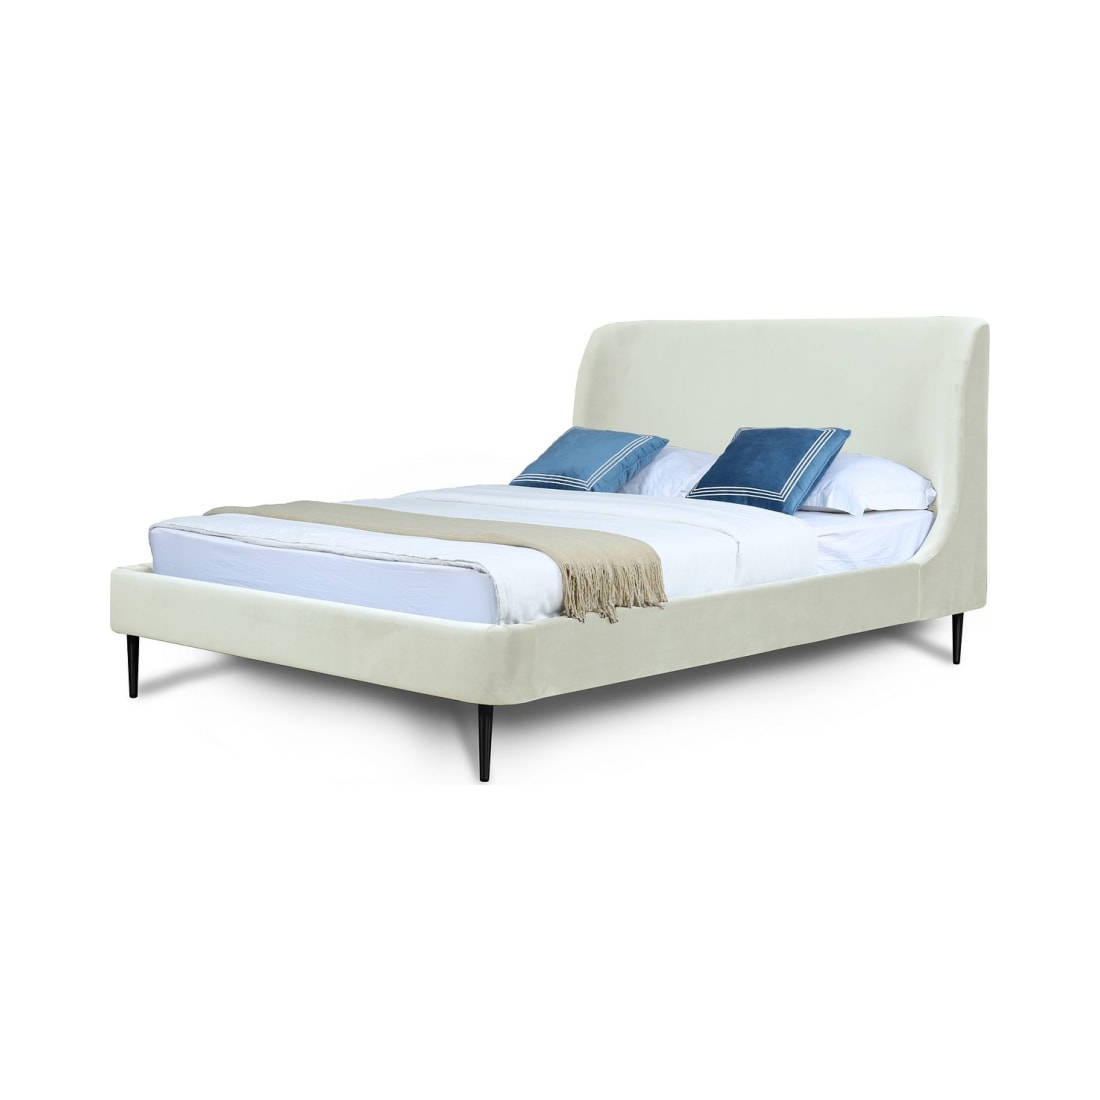 Heather Full-Size Bed in Cream and Black Legs